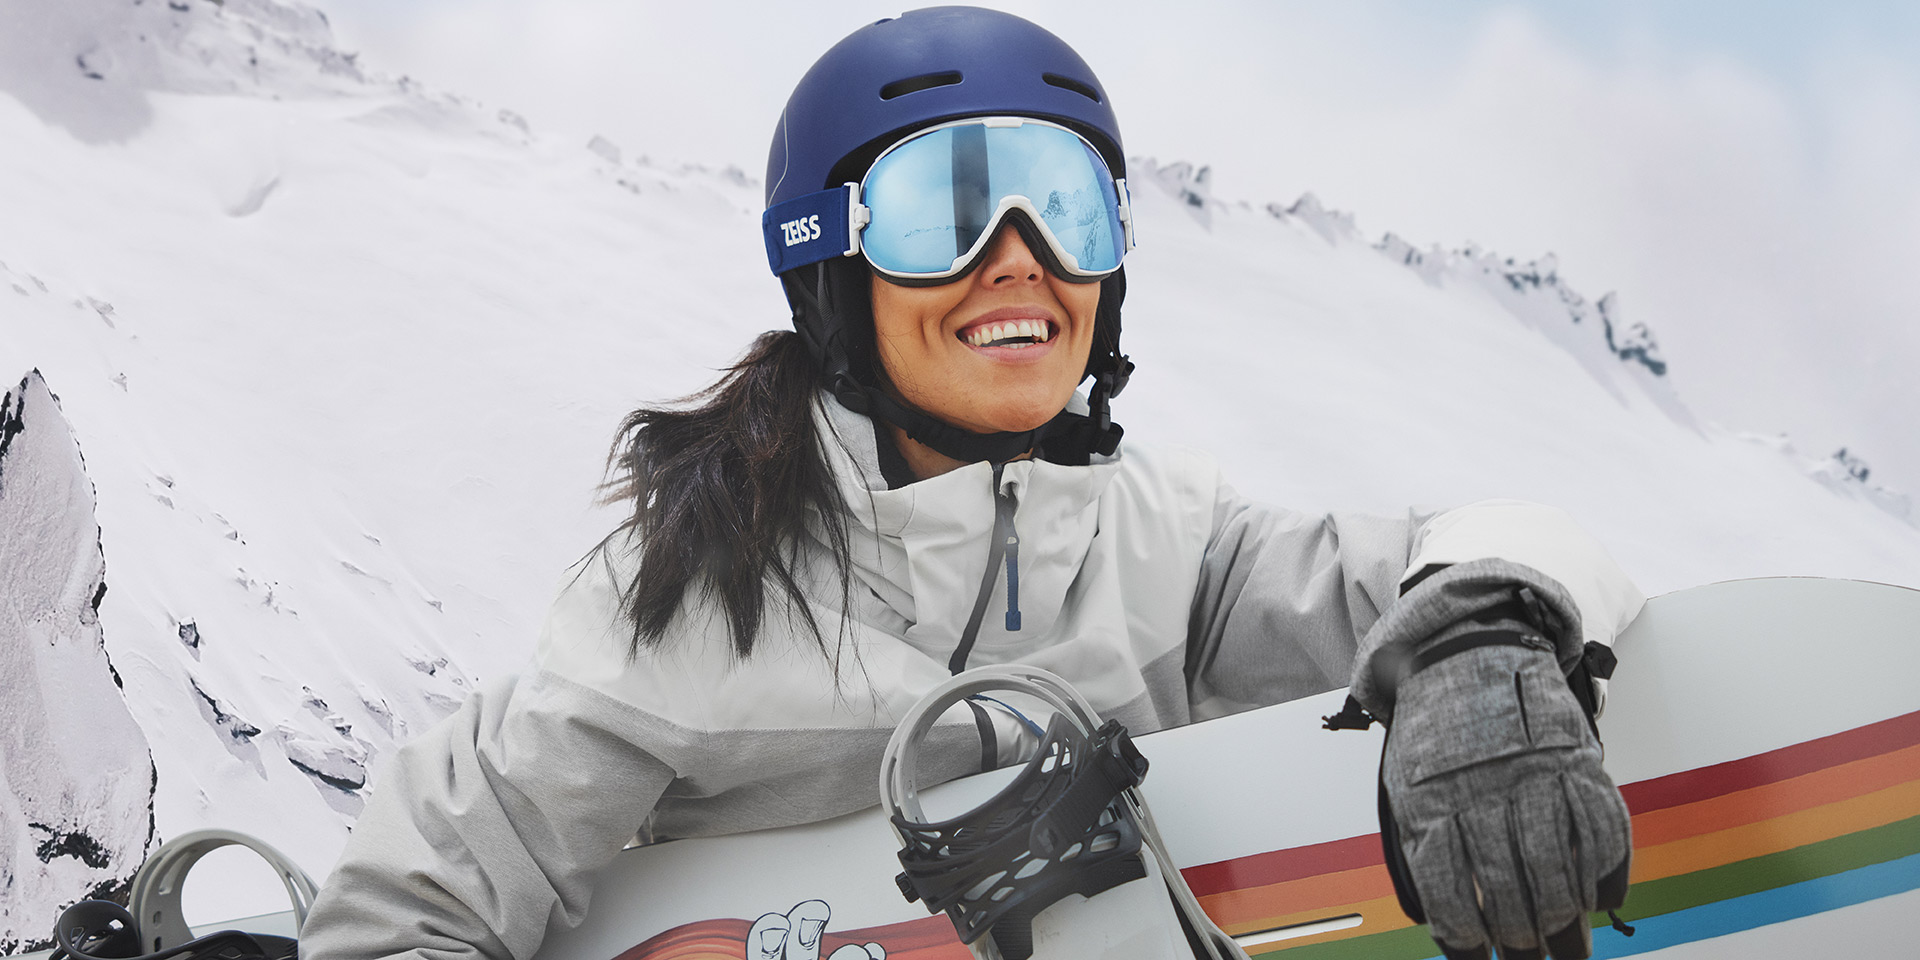 A young women wearing snow goggles with ZEISS Interchangeable technology and hold a snowboard.